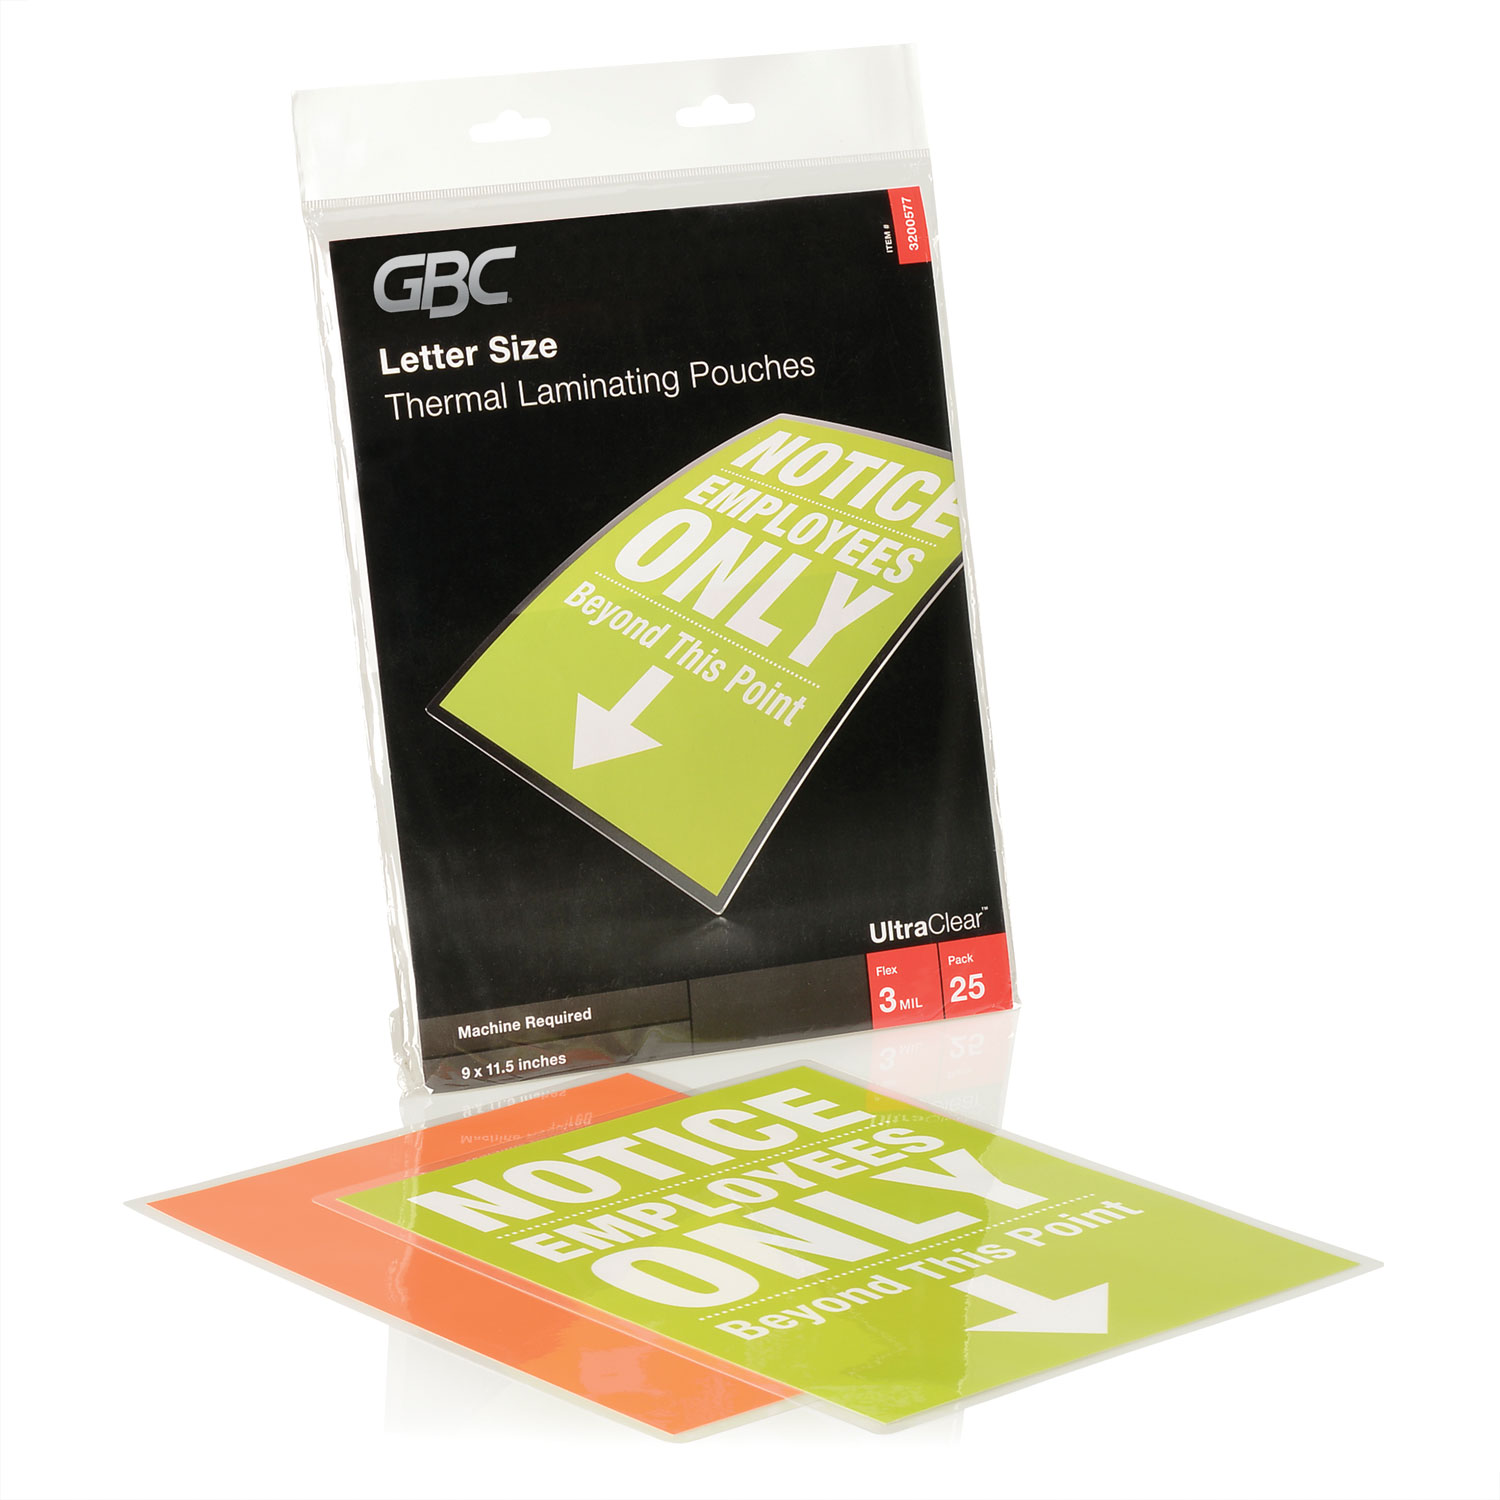  GBC 3200577CF UltraClear Thermal Laminating Pouches, 3 mil, 9 x 11.5, Gloss Clear, 25/Pack (GBC3200577B) 